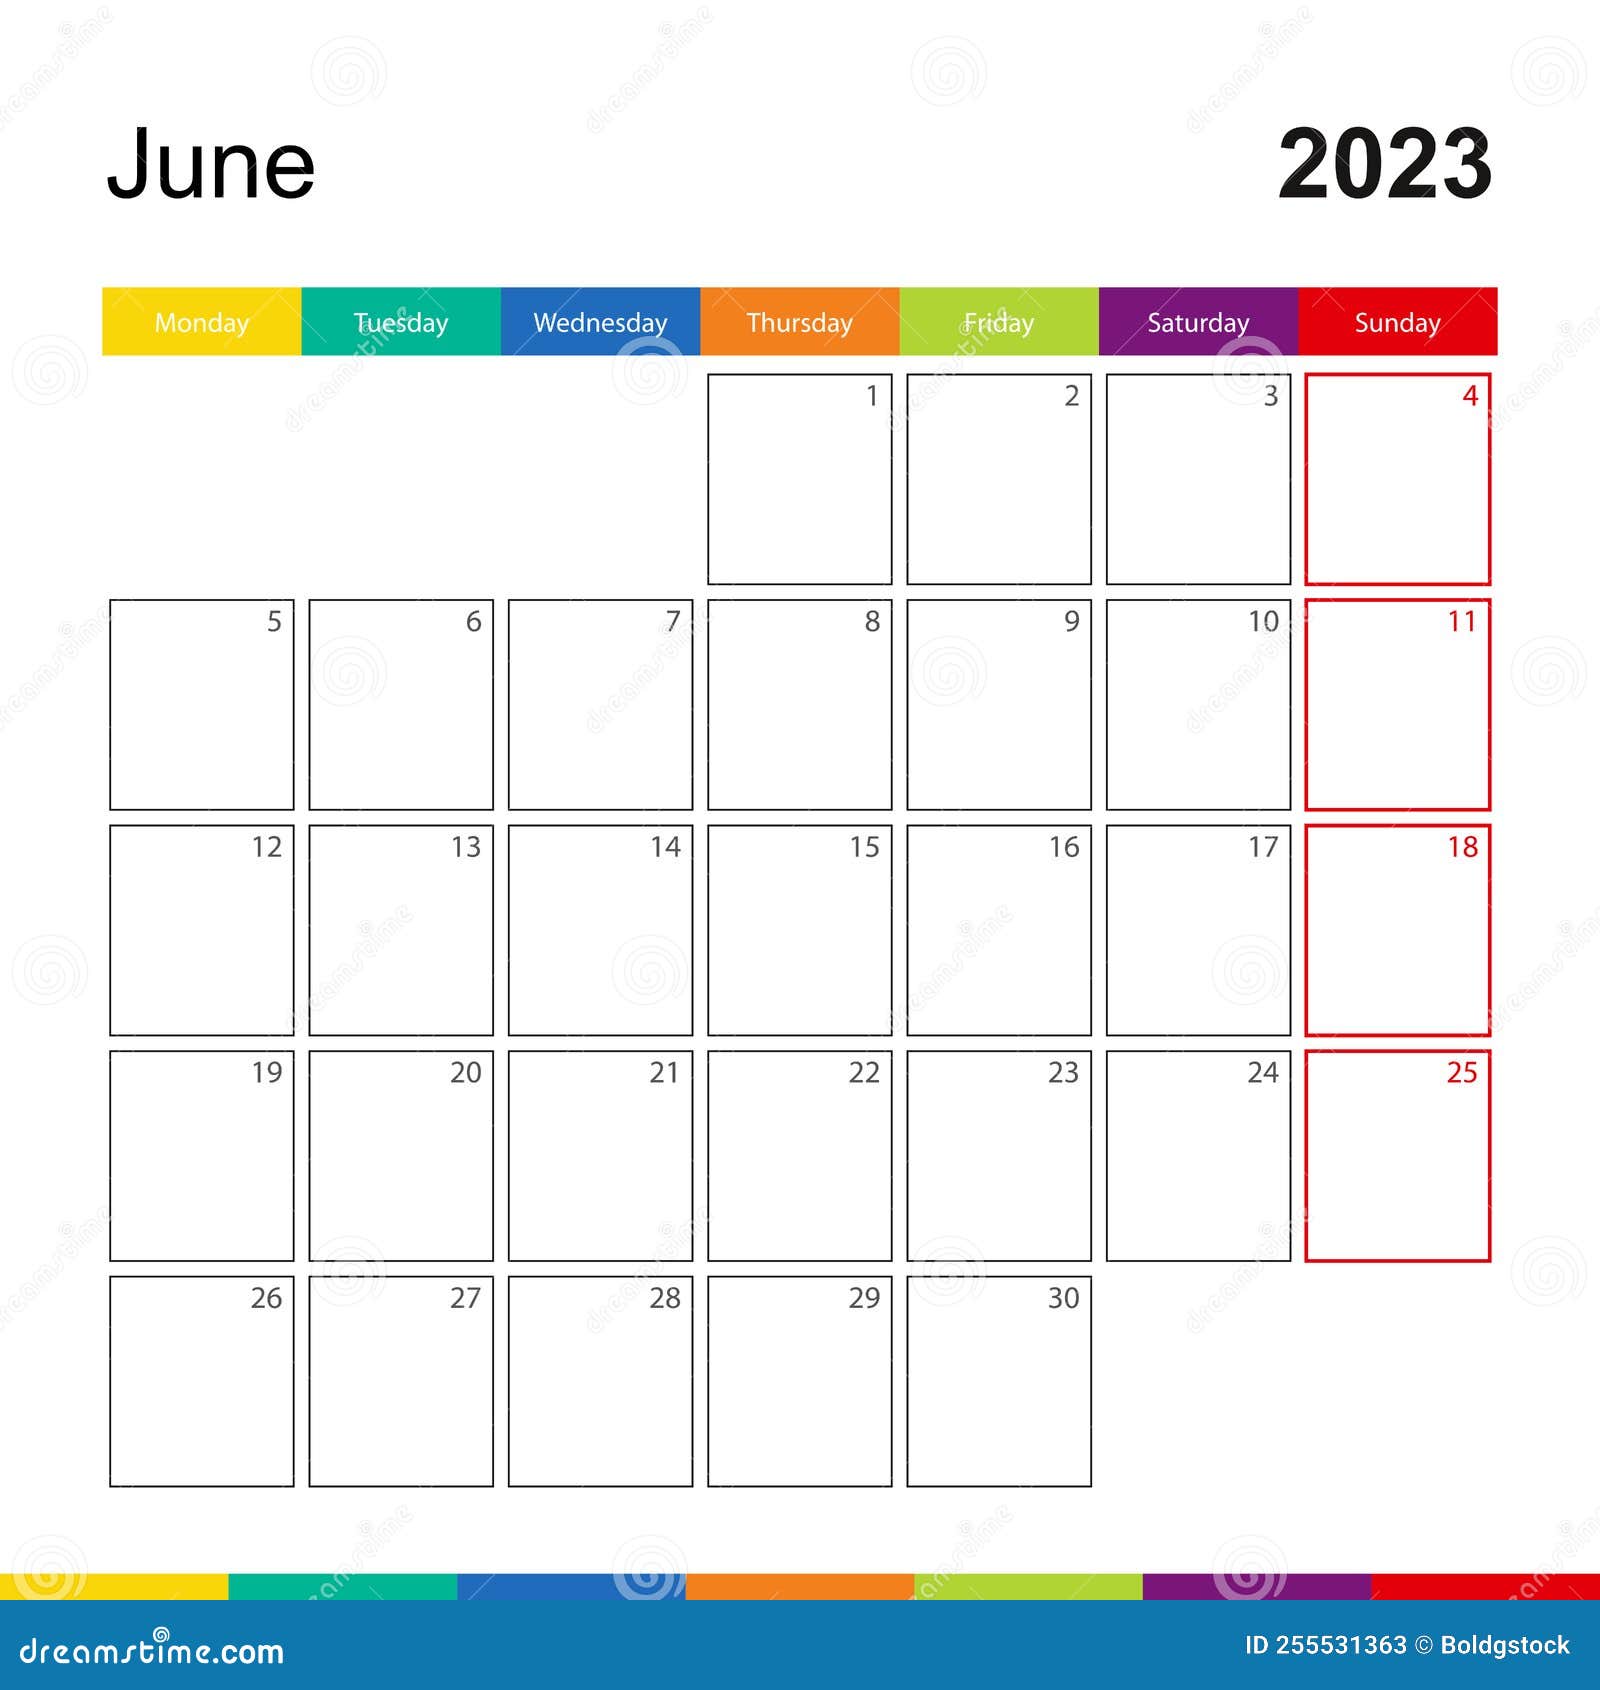 June 2023 Colorful Wall Calendar, Week Starts on Monday Stock Vector